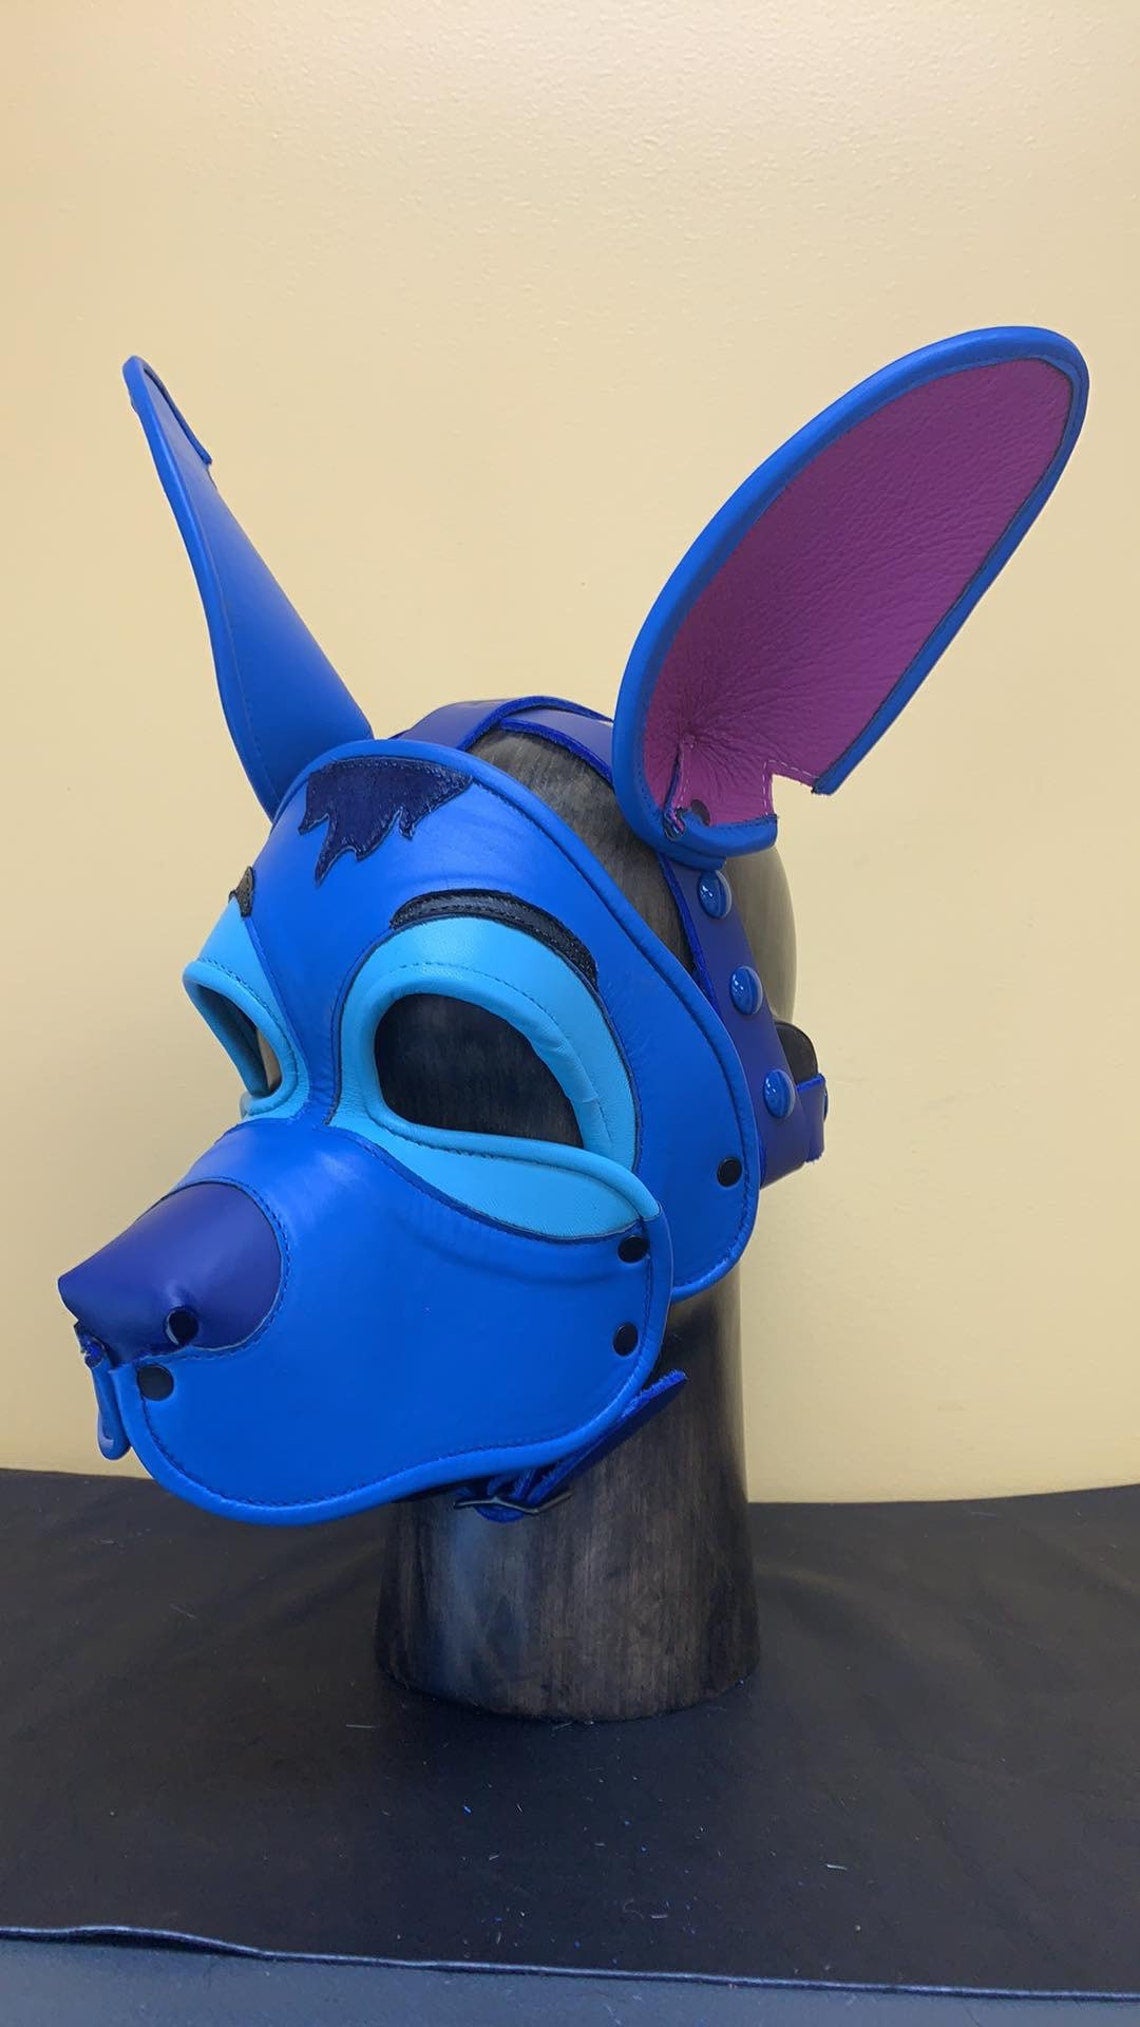 Stitch Leather Pup Mask, front left view.